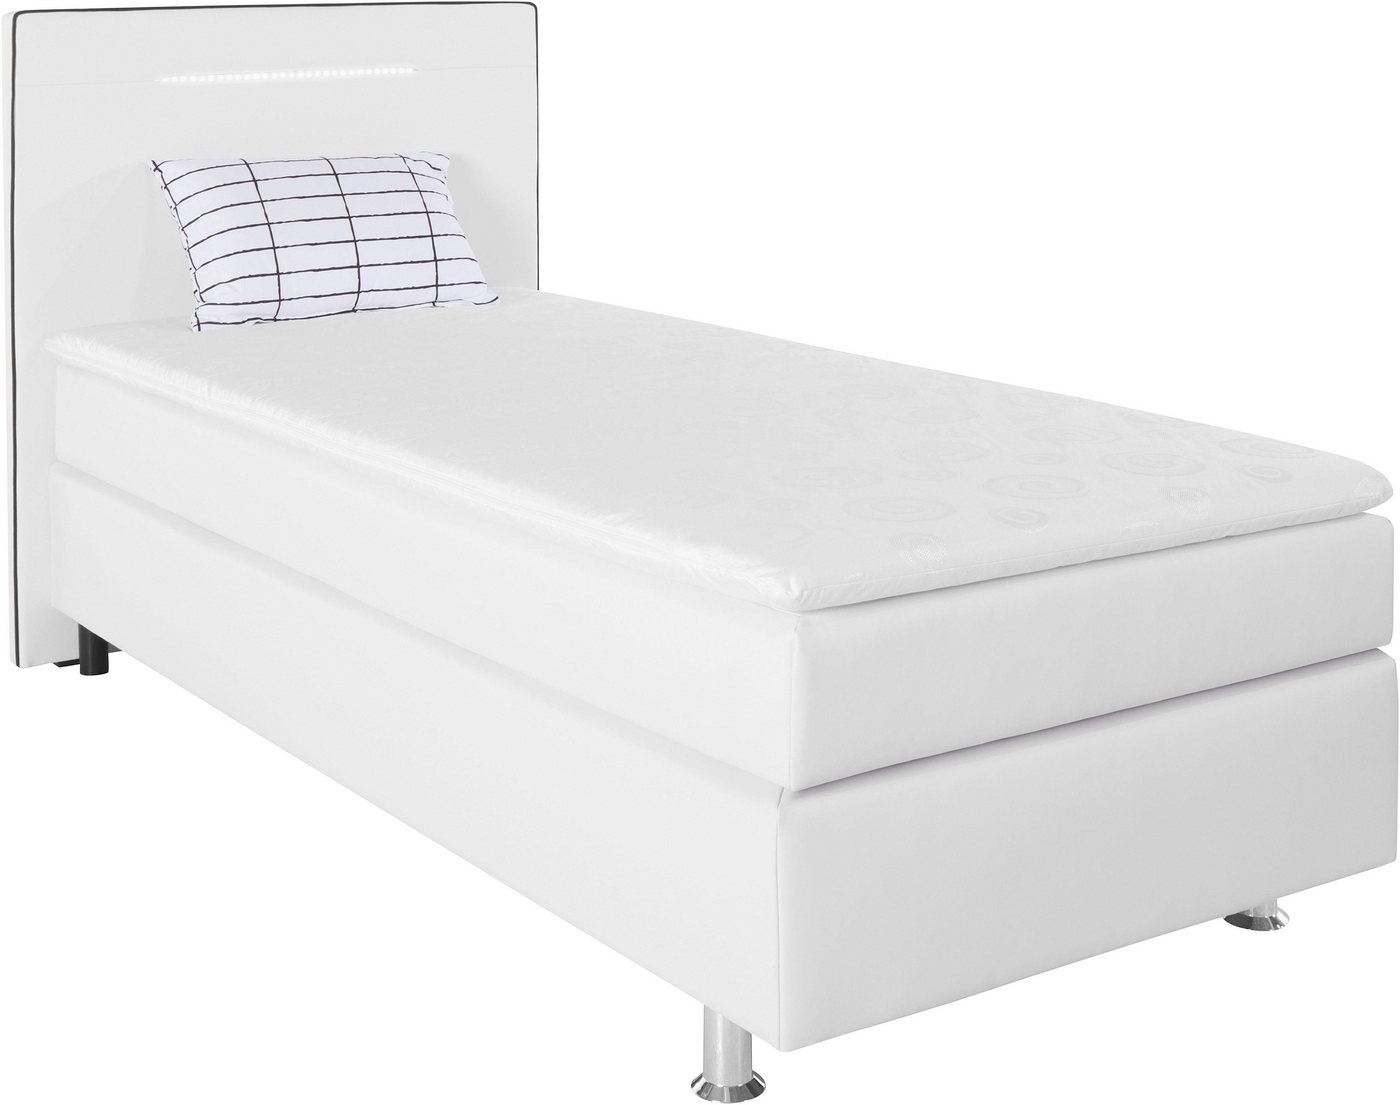 COLLECTION AB Boxspringbett, inkl. LED-Beleuchtung, Topper und Kissen von COLLECTION AB